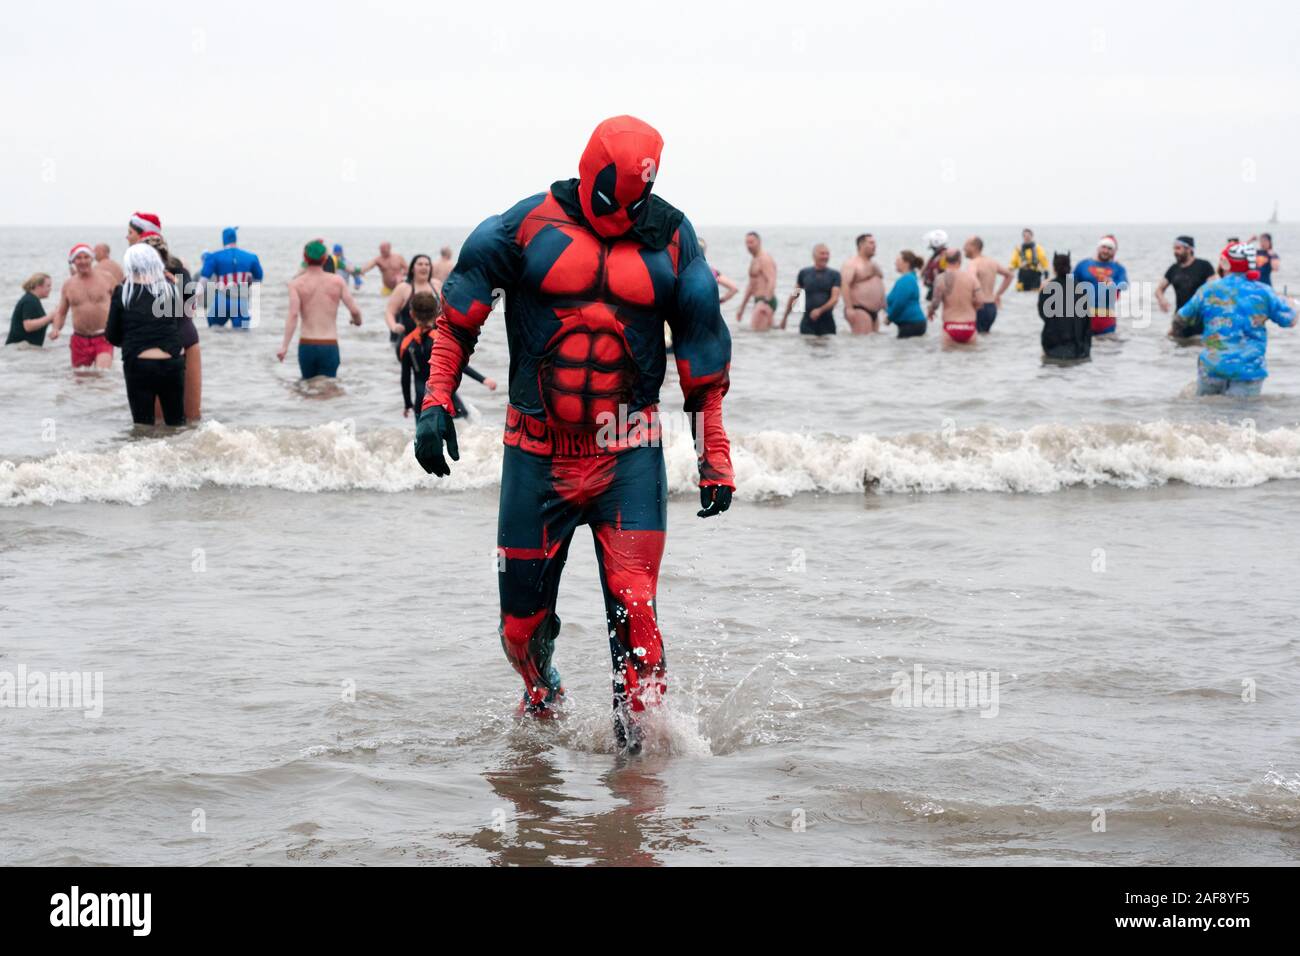 Christmas Day fancy dress charity swim in Porthcawl, a seaside town in South Wales. Super Hero wearing Spiderman Costume emerging from sea. 25-12-2018 Stock Photo